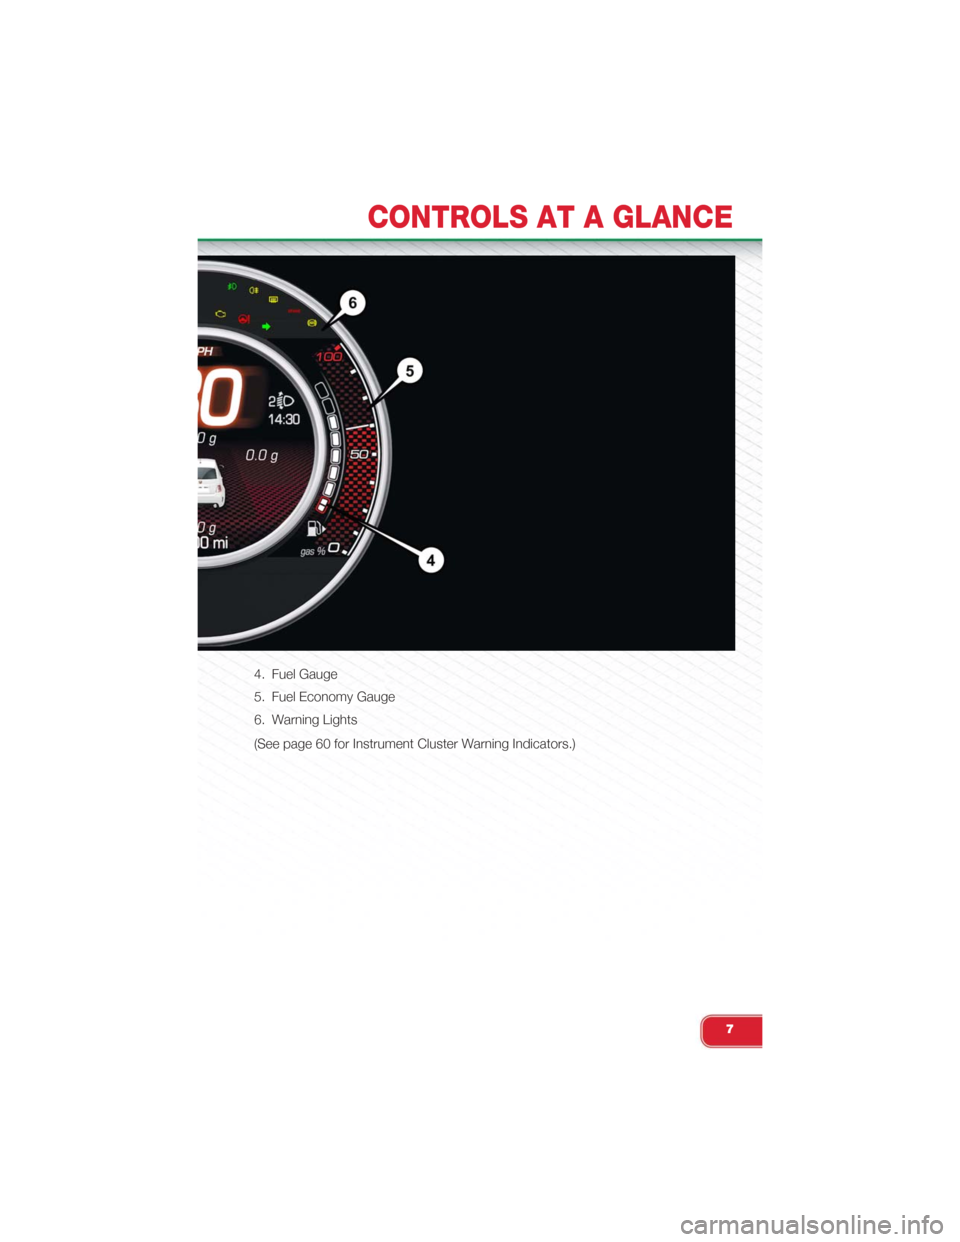 FIAT 500 ABARTH 2015 2.G User Guide 4. Fuel Gauge
5. Fuel Economy Gauge
6. Warning Lights
(See page 60 for Instrument Cluster Warning Indicators.)
CONTROLS AT A GLANCE
7 